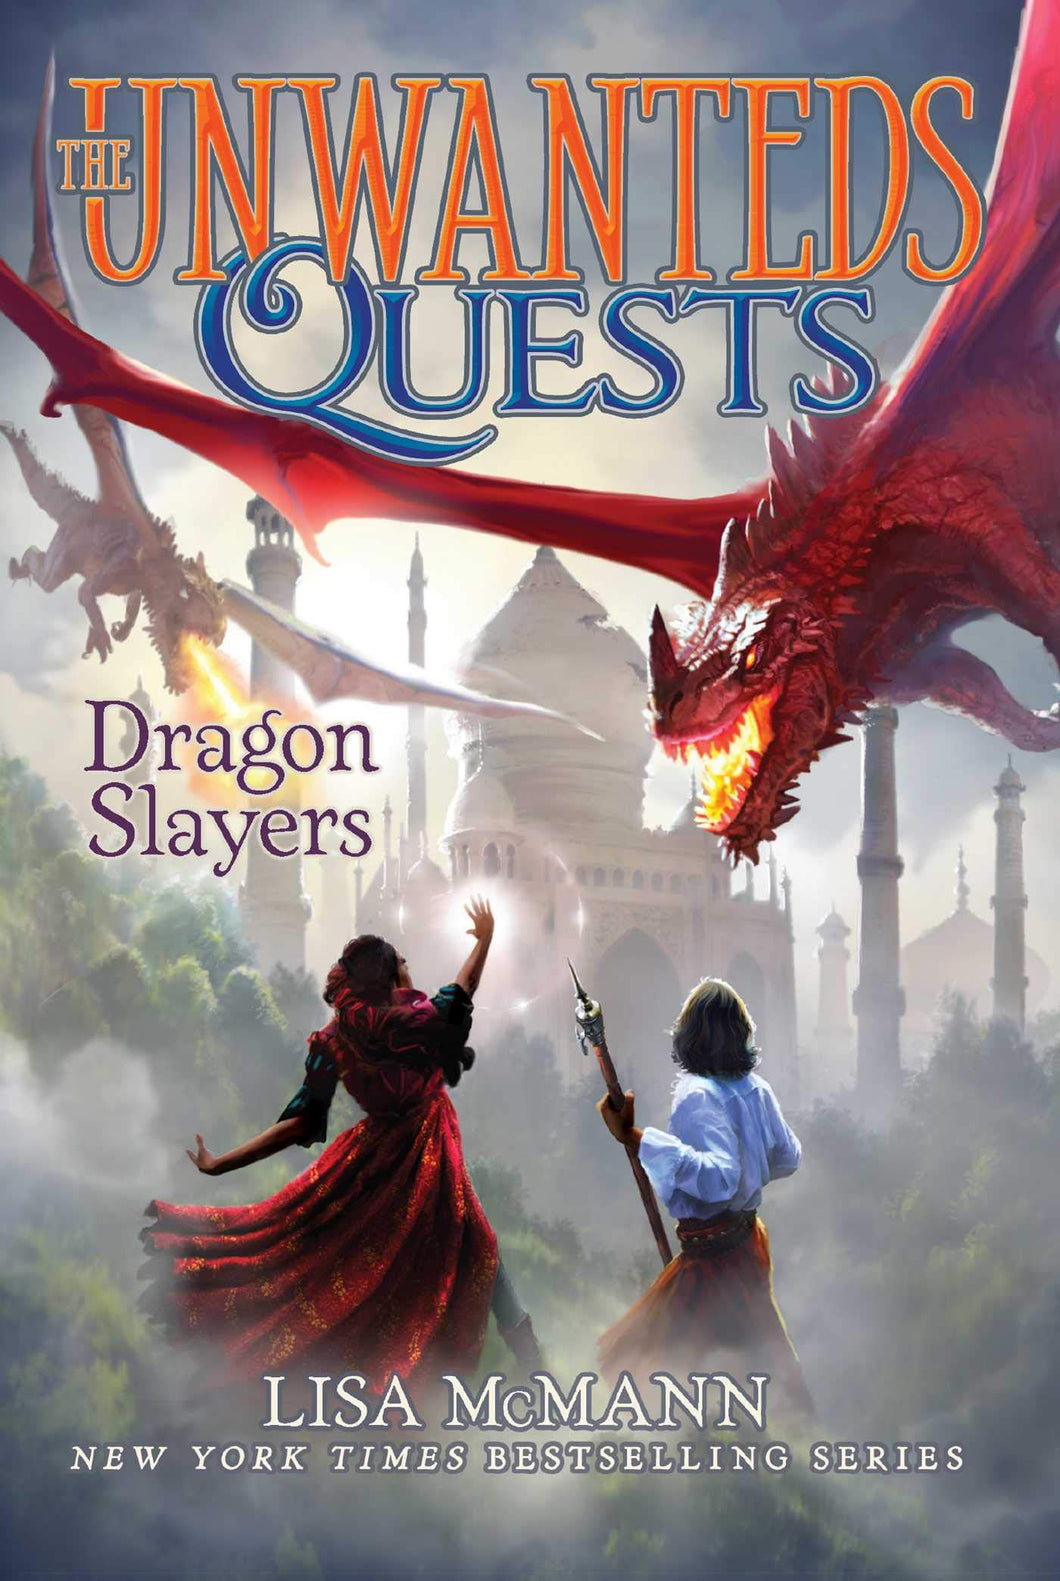 Dragon Slayers (The Unwanteds Quests Book 6)